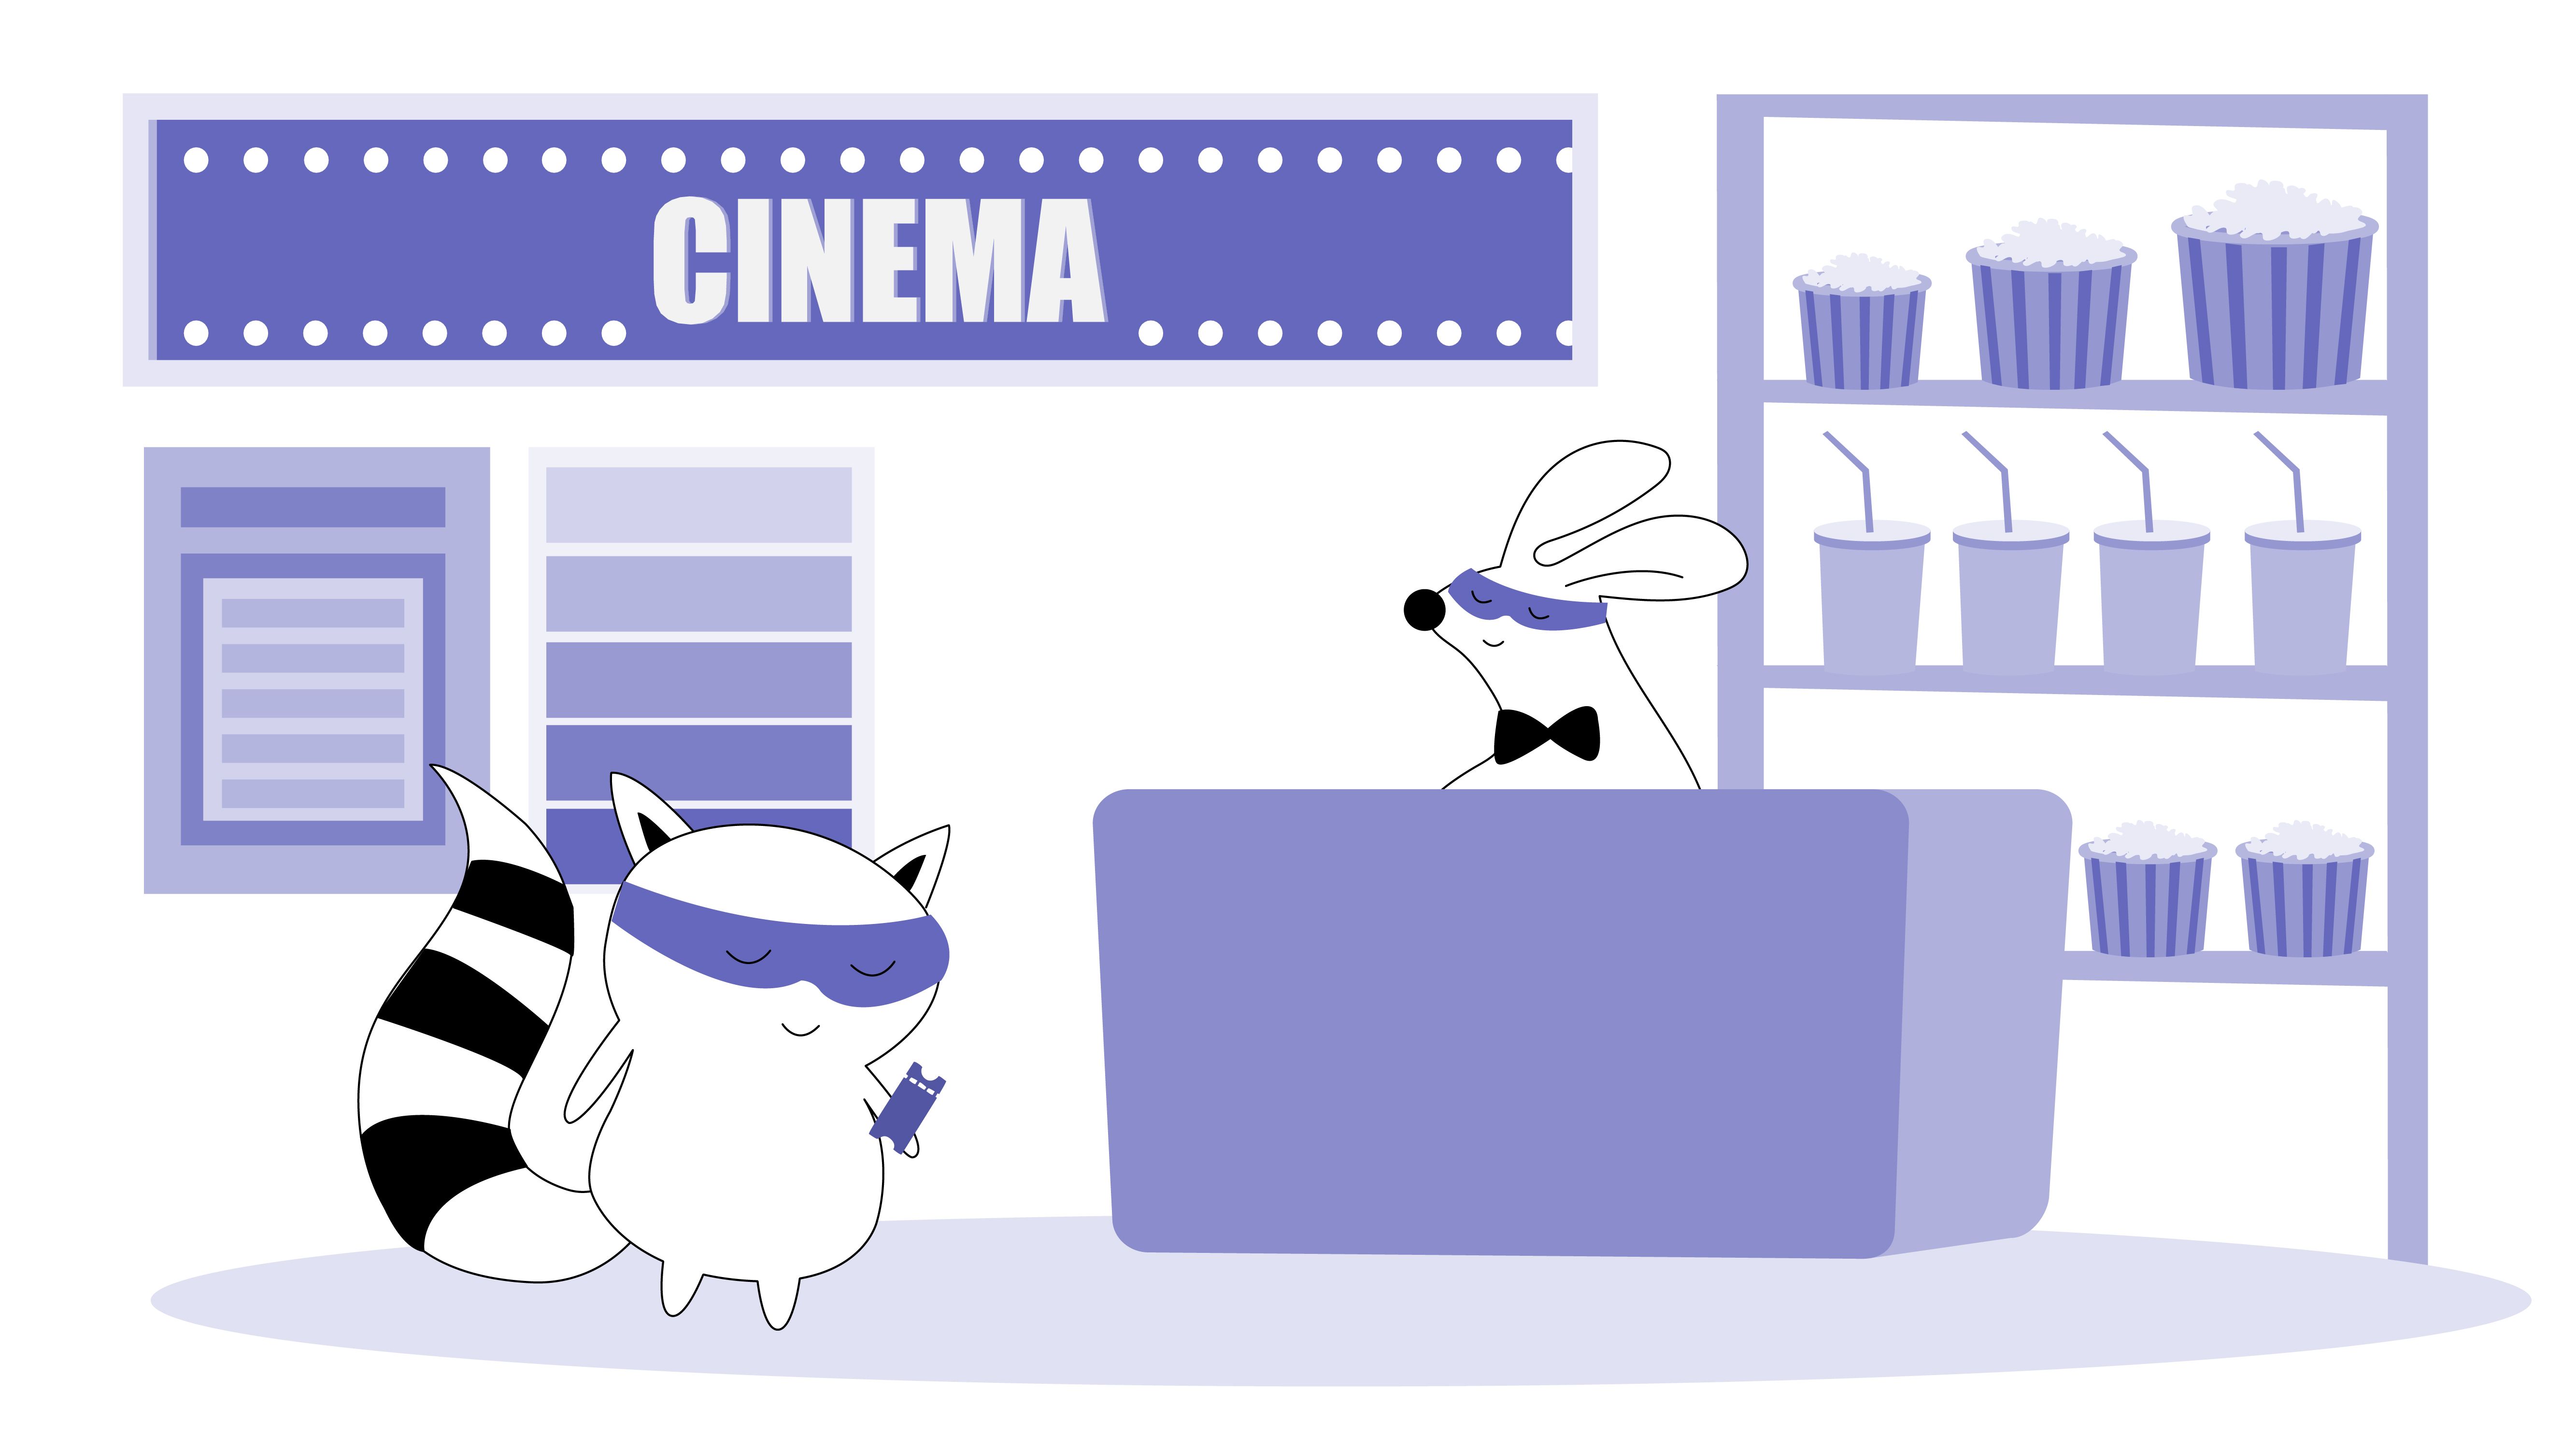 Pocky buys a cinema ticket at the movie theater. He says to the cashier, “Bonsoir, monsieur.”